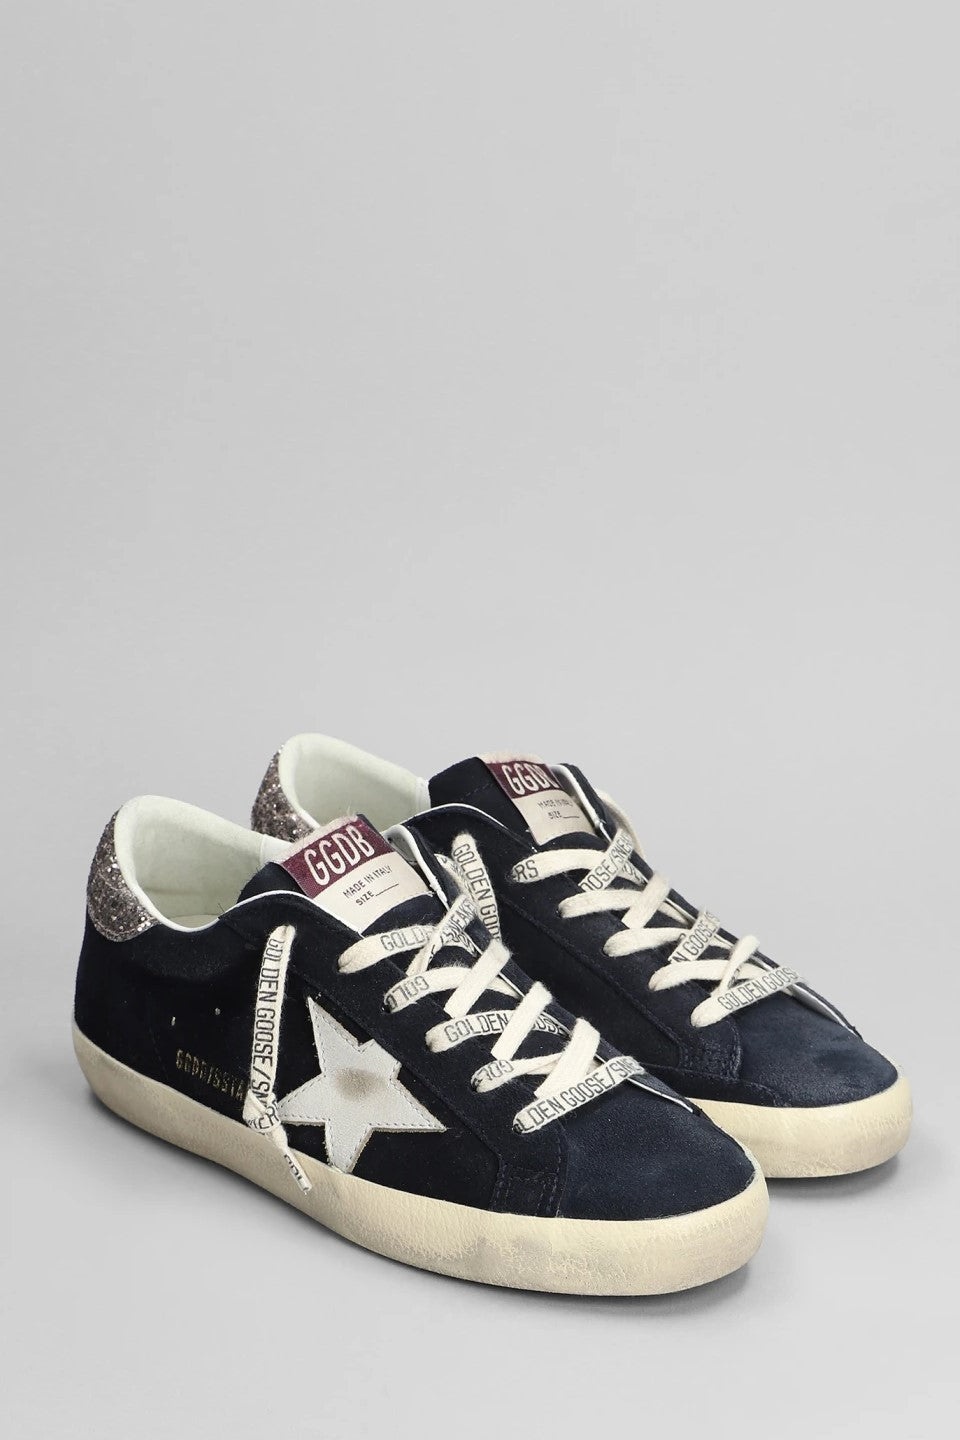 WOMEN'S SUPER-STAR SUEDE SNEAKERS (BLUE/WHITE/SILVER) - 3